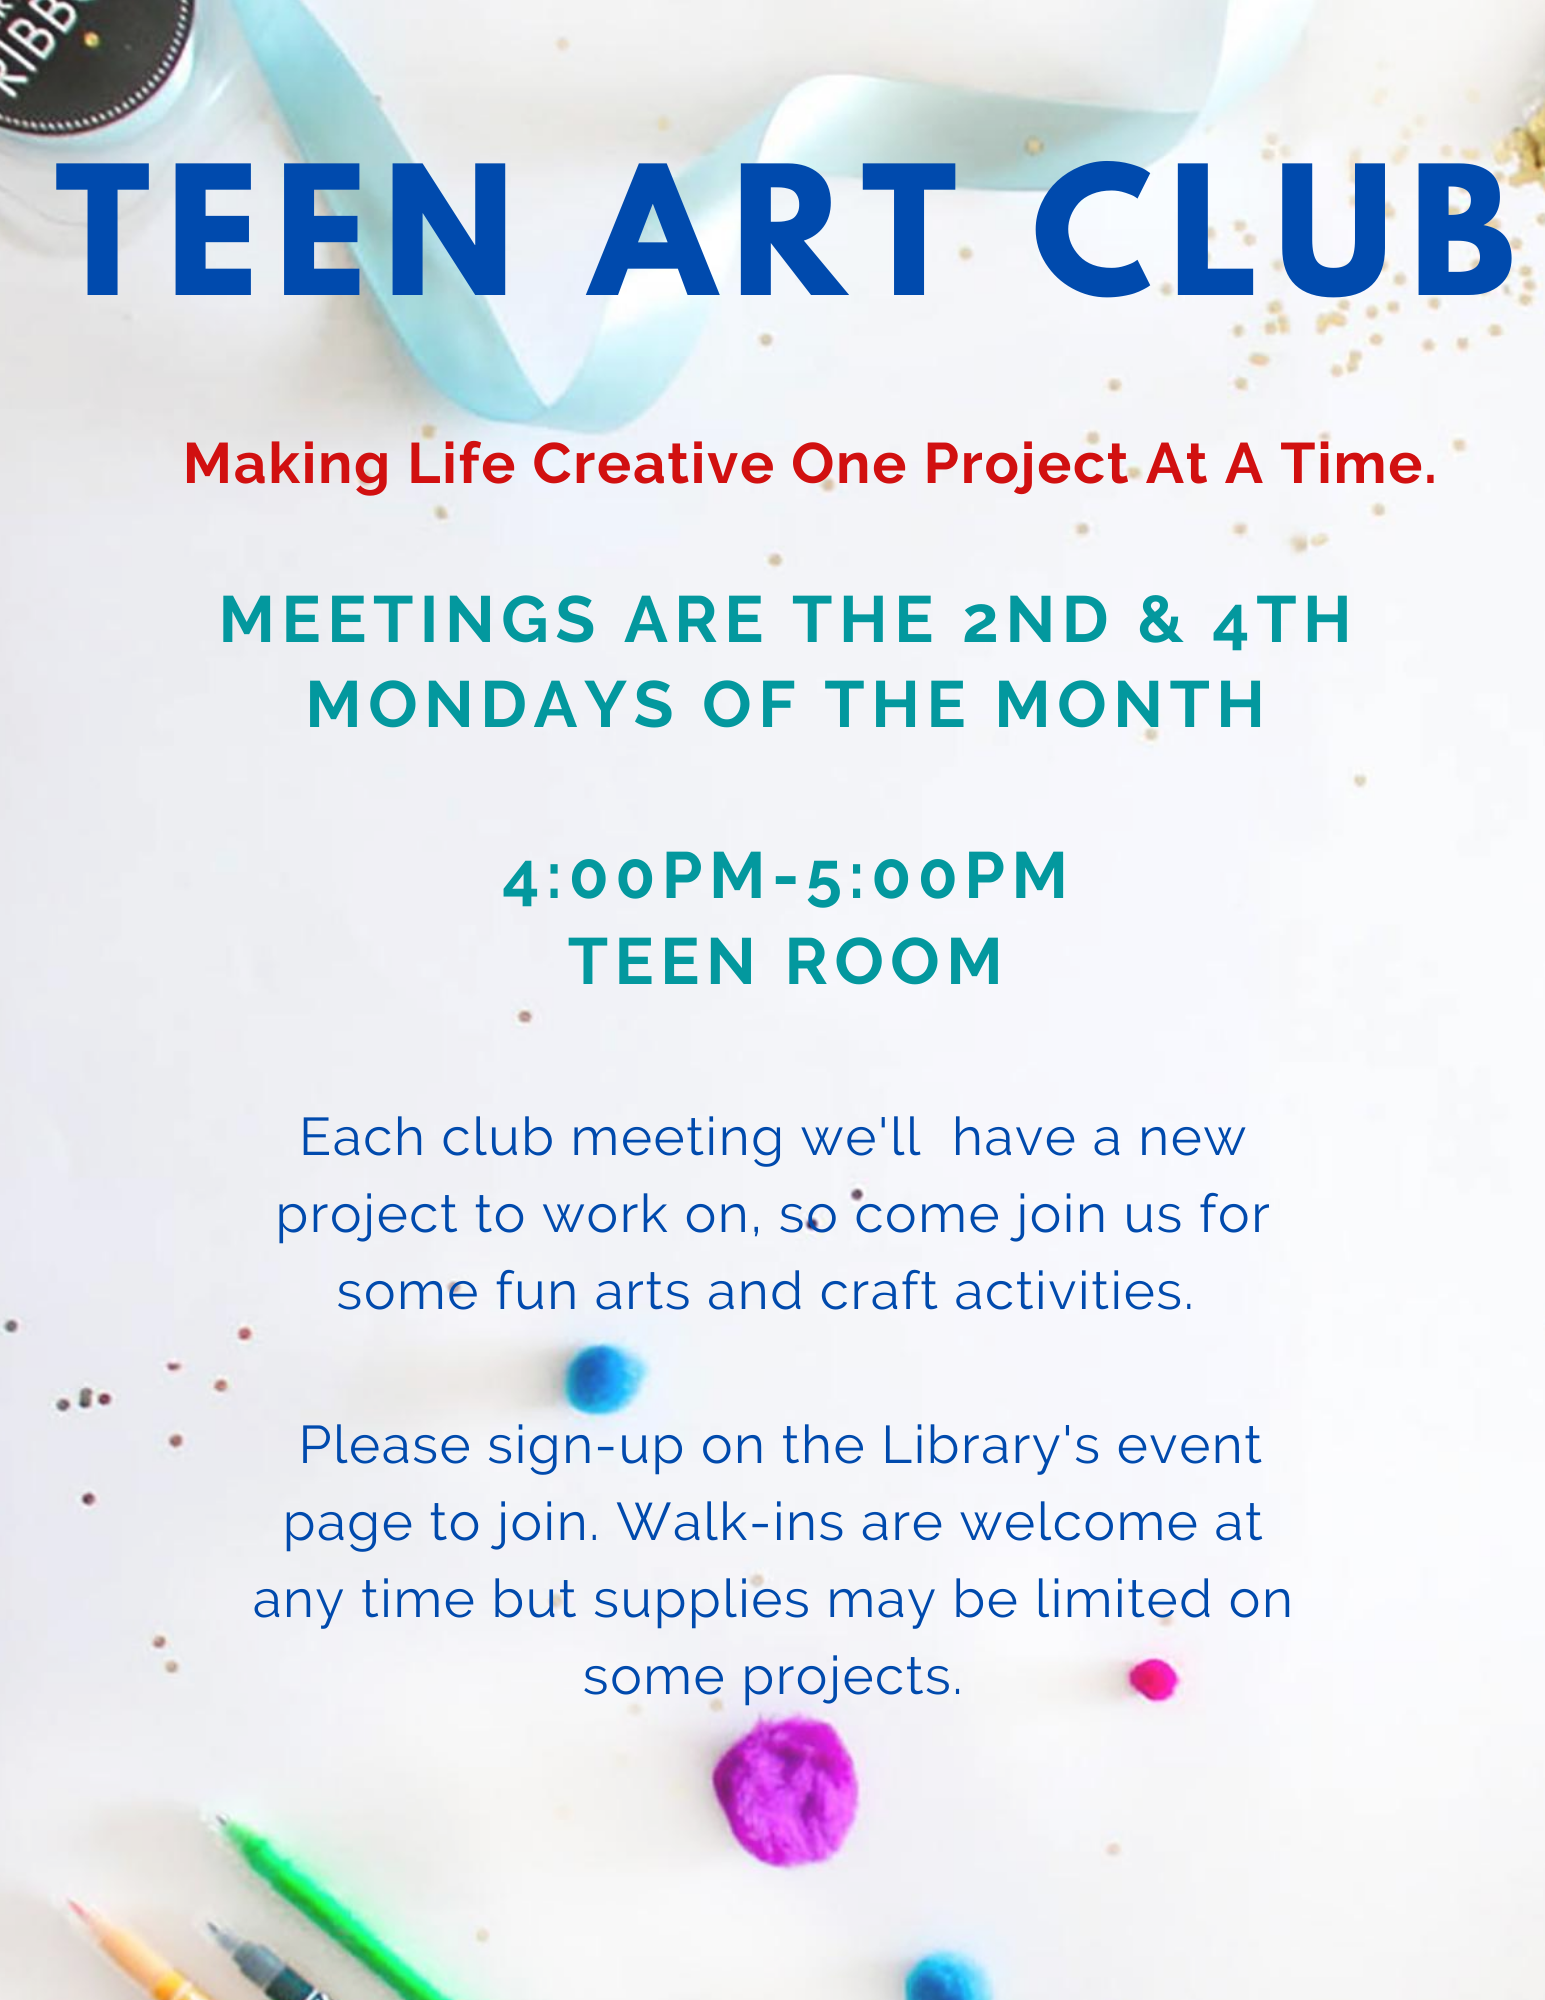 Teen Art Club in blue with crafts supplies in the background